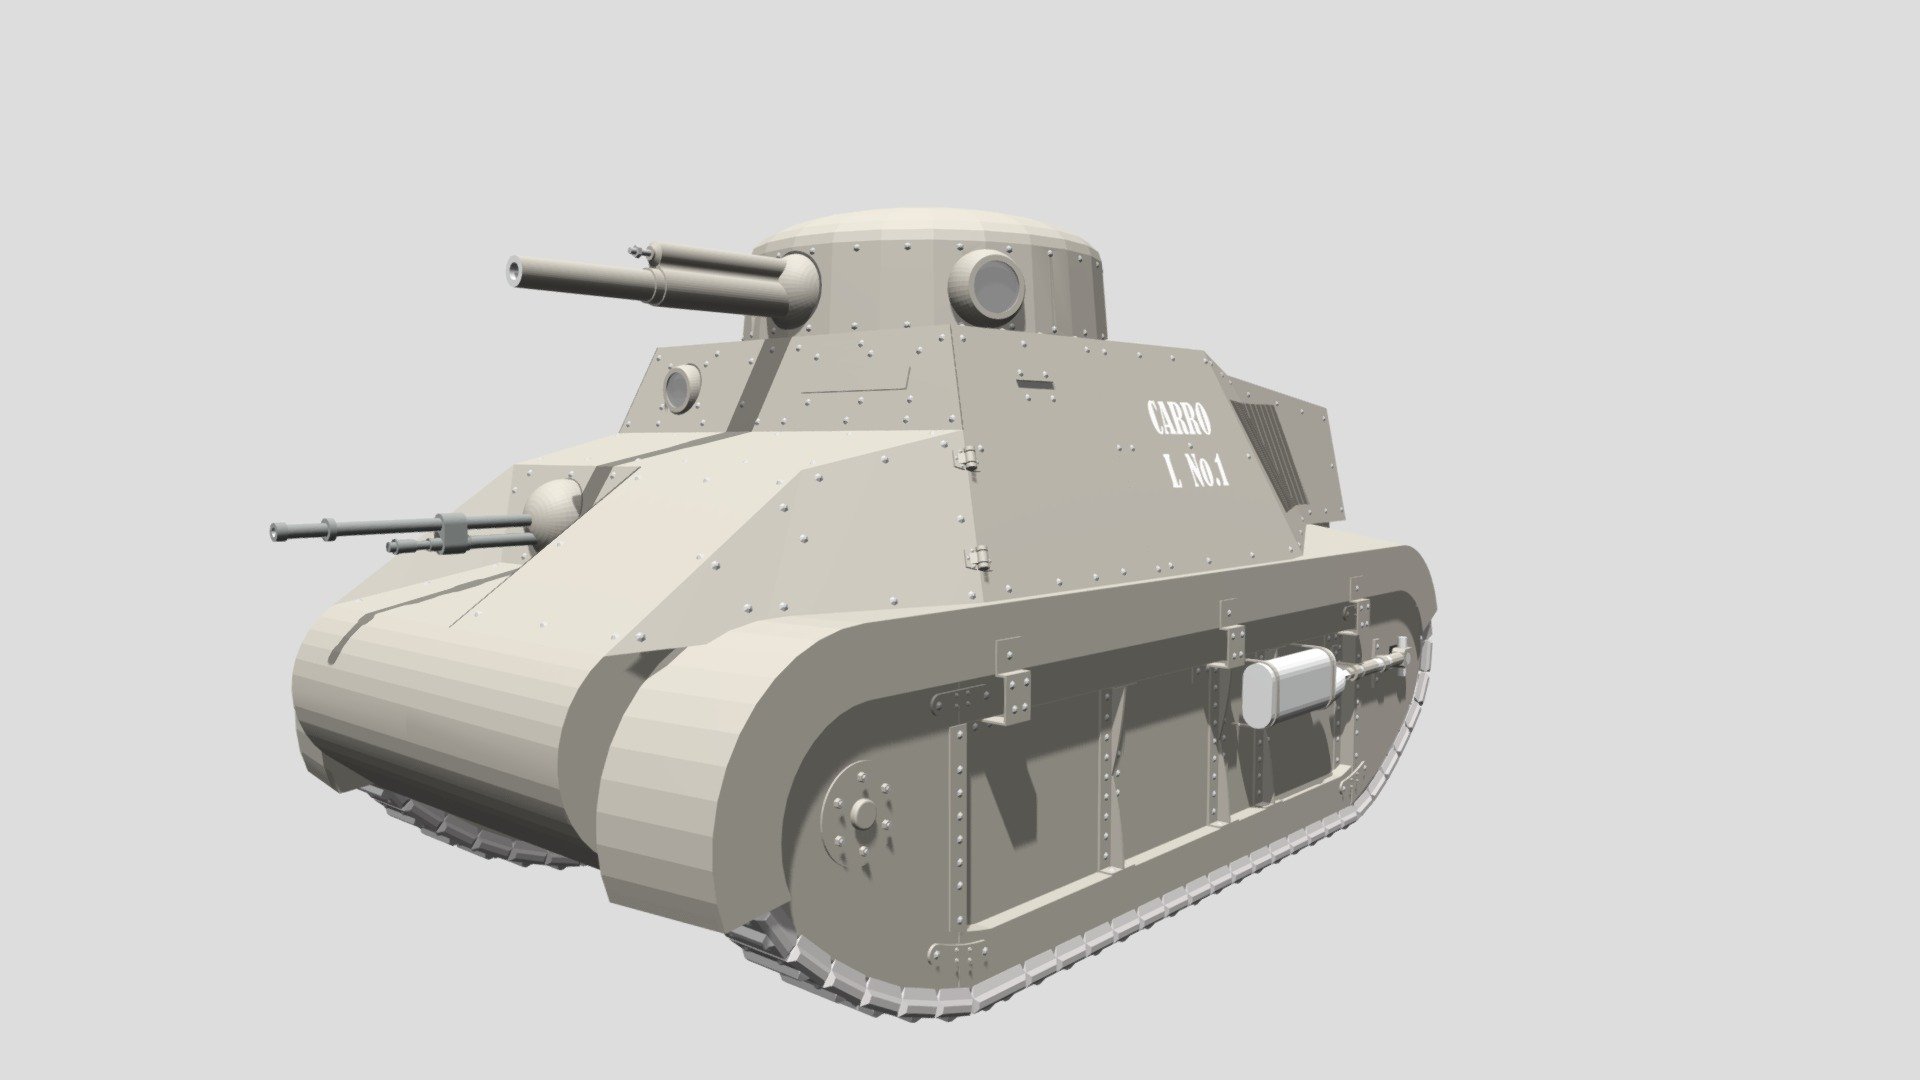 The Carro de Combate Ligero Para Infantería Modelo 1936, also known as the ‘Trubia L.A. nº1’, is one of the many tanks that were imagined but never delivered. Although it never left the drawing board, it went on to heavily influence the Trubia-Naval, the most heavily produced tank of the Second Spanish Republic 3d model